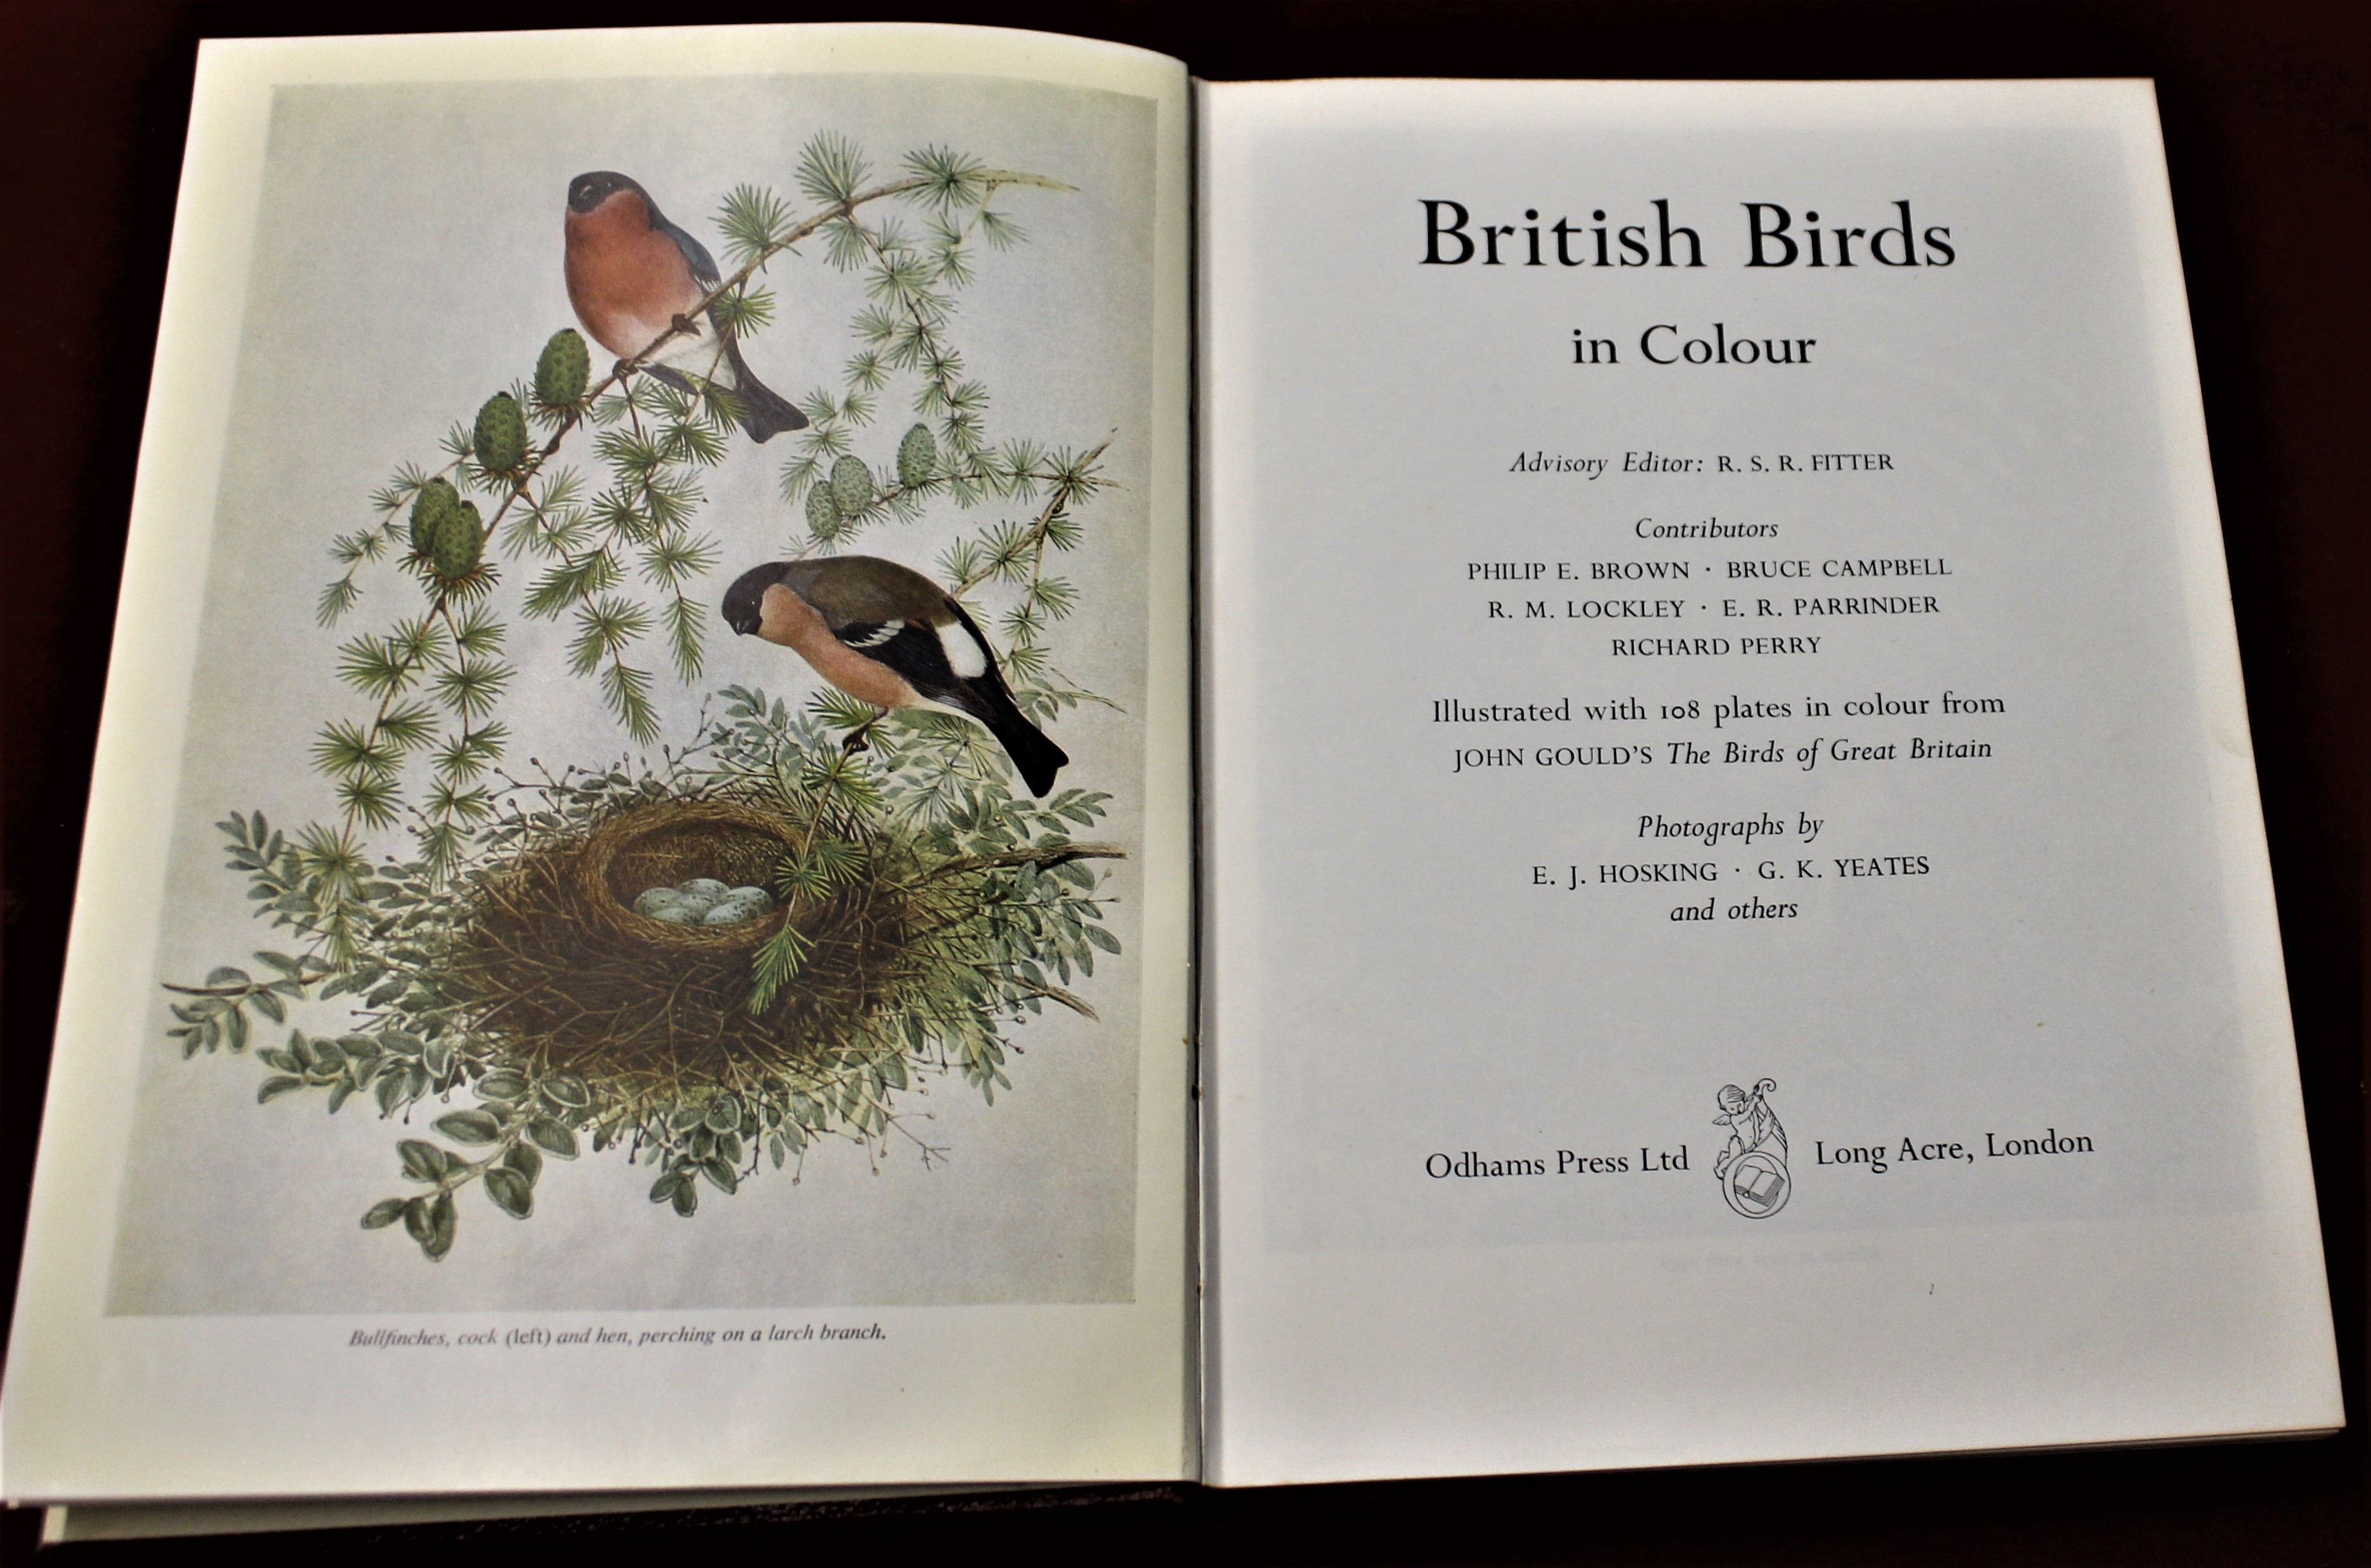 Book-British Birds in colour by R.S.R. Fitter- includes 108 colour plates from John Gord's 'The - Image 4 of 4